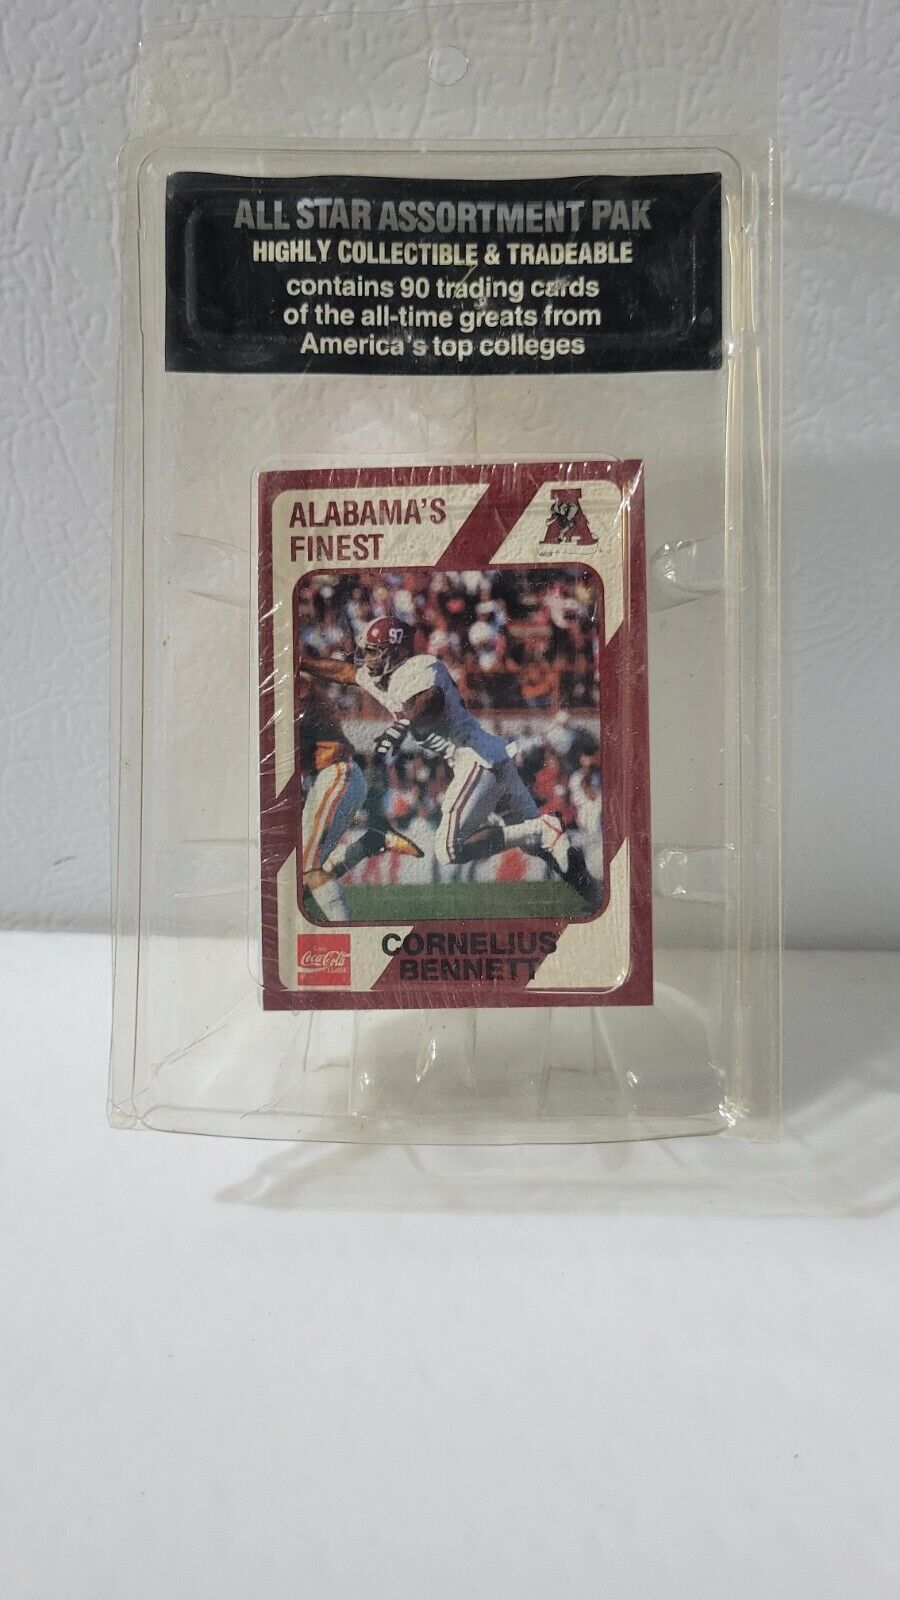 1989 All Star Assortment Pak Colleges Finest Trading Cards NEW SEALED